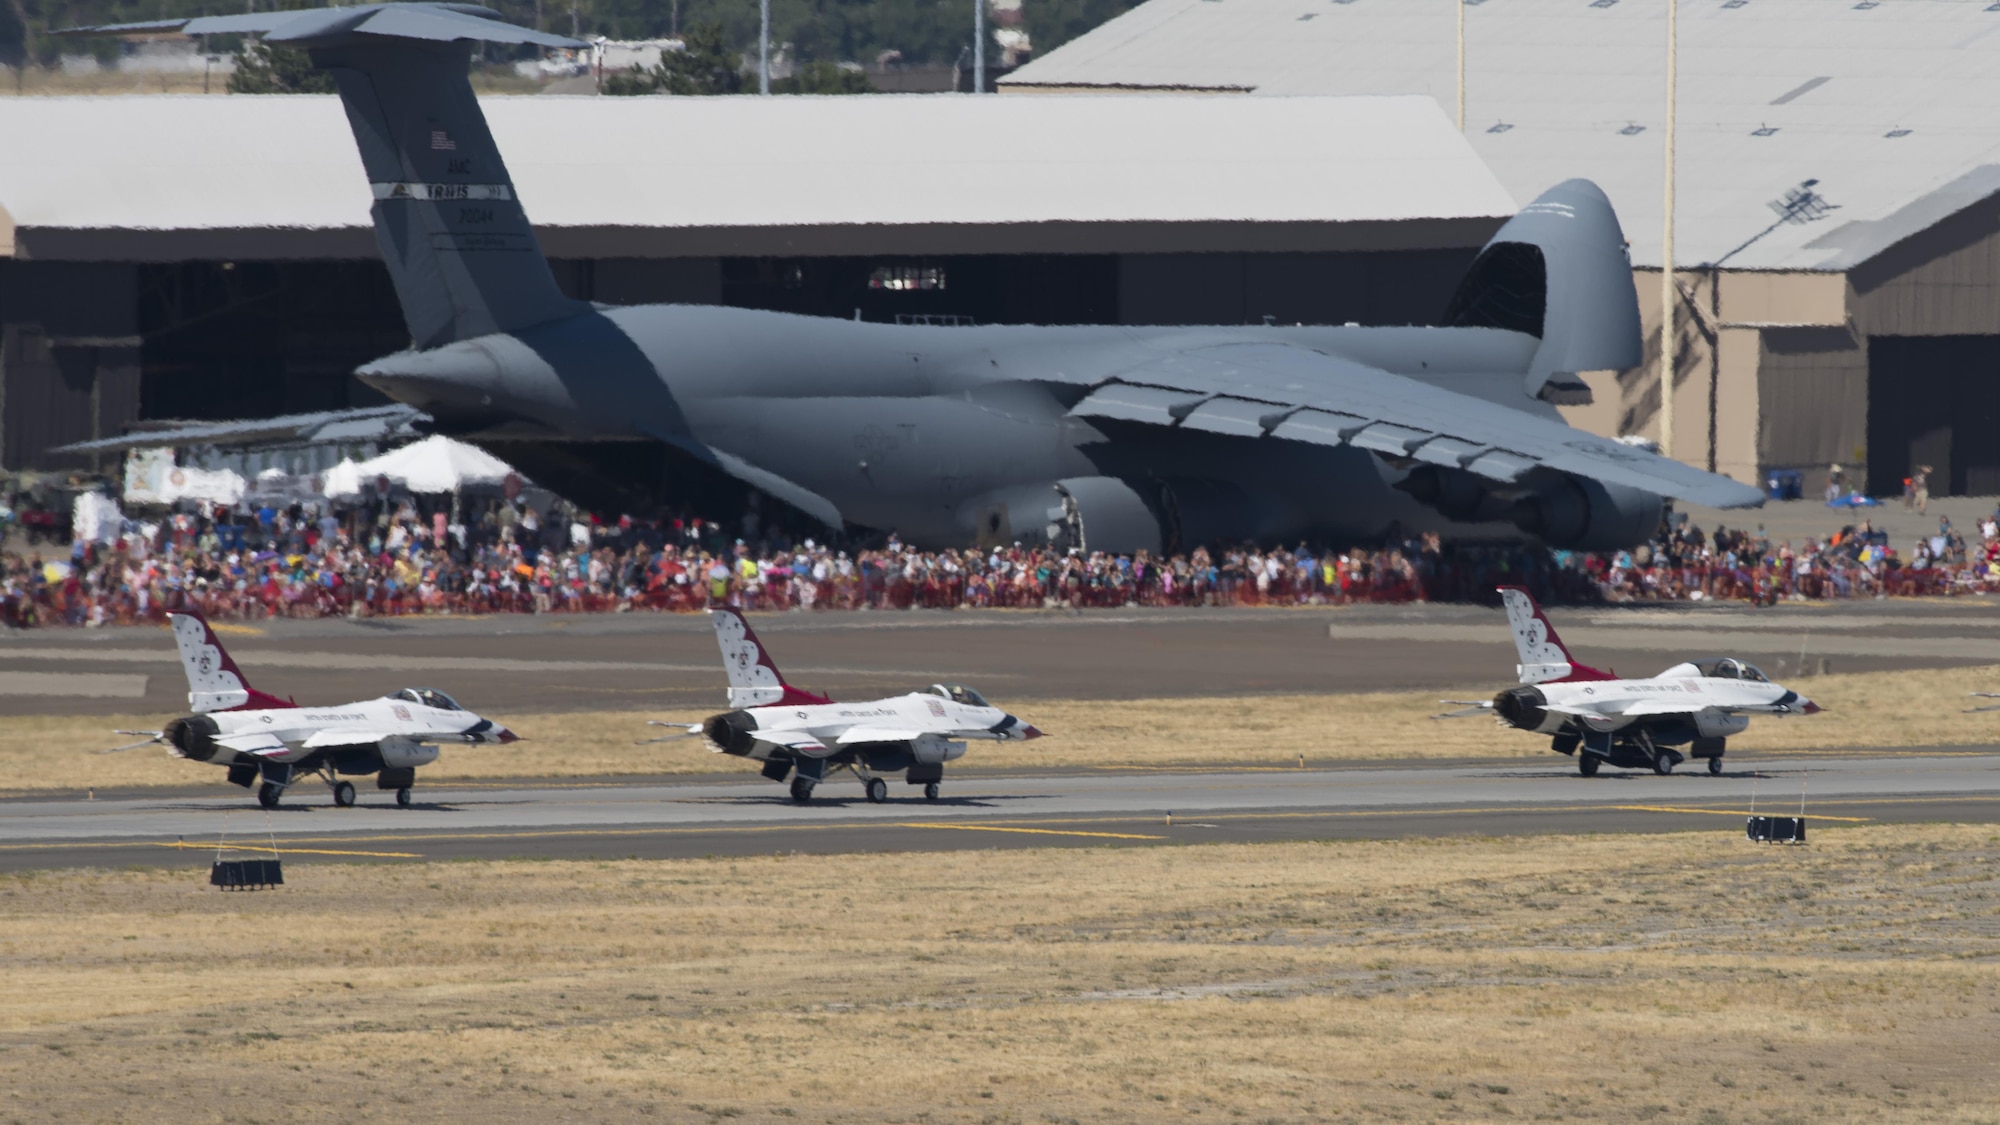 The Thunderbirds aerial demonstration team taxi in front of a C-5 Galaxy and hundreds of attendees at the Skyfest 2017 air show and open house July 30, 2017, at Fairchild Air Force Base, Washington. Thousands attended the first Fairchild air show in three years, helping the base to celebrate it's 75th anniversary. (U.S. Air Force photo / Airman 1st Class Ryan Lackey)